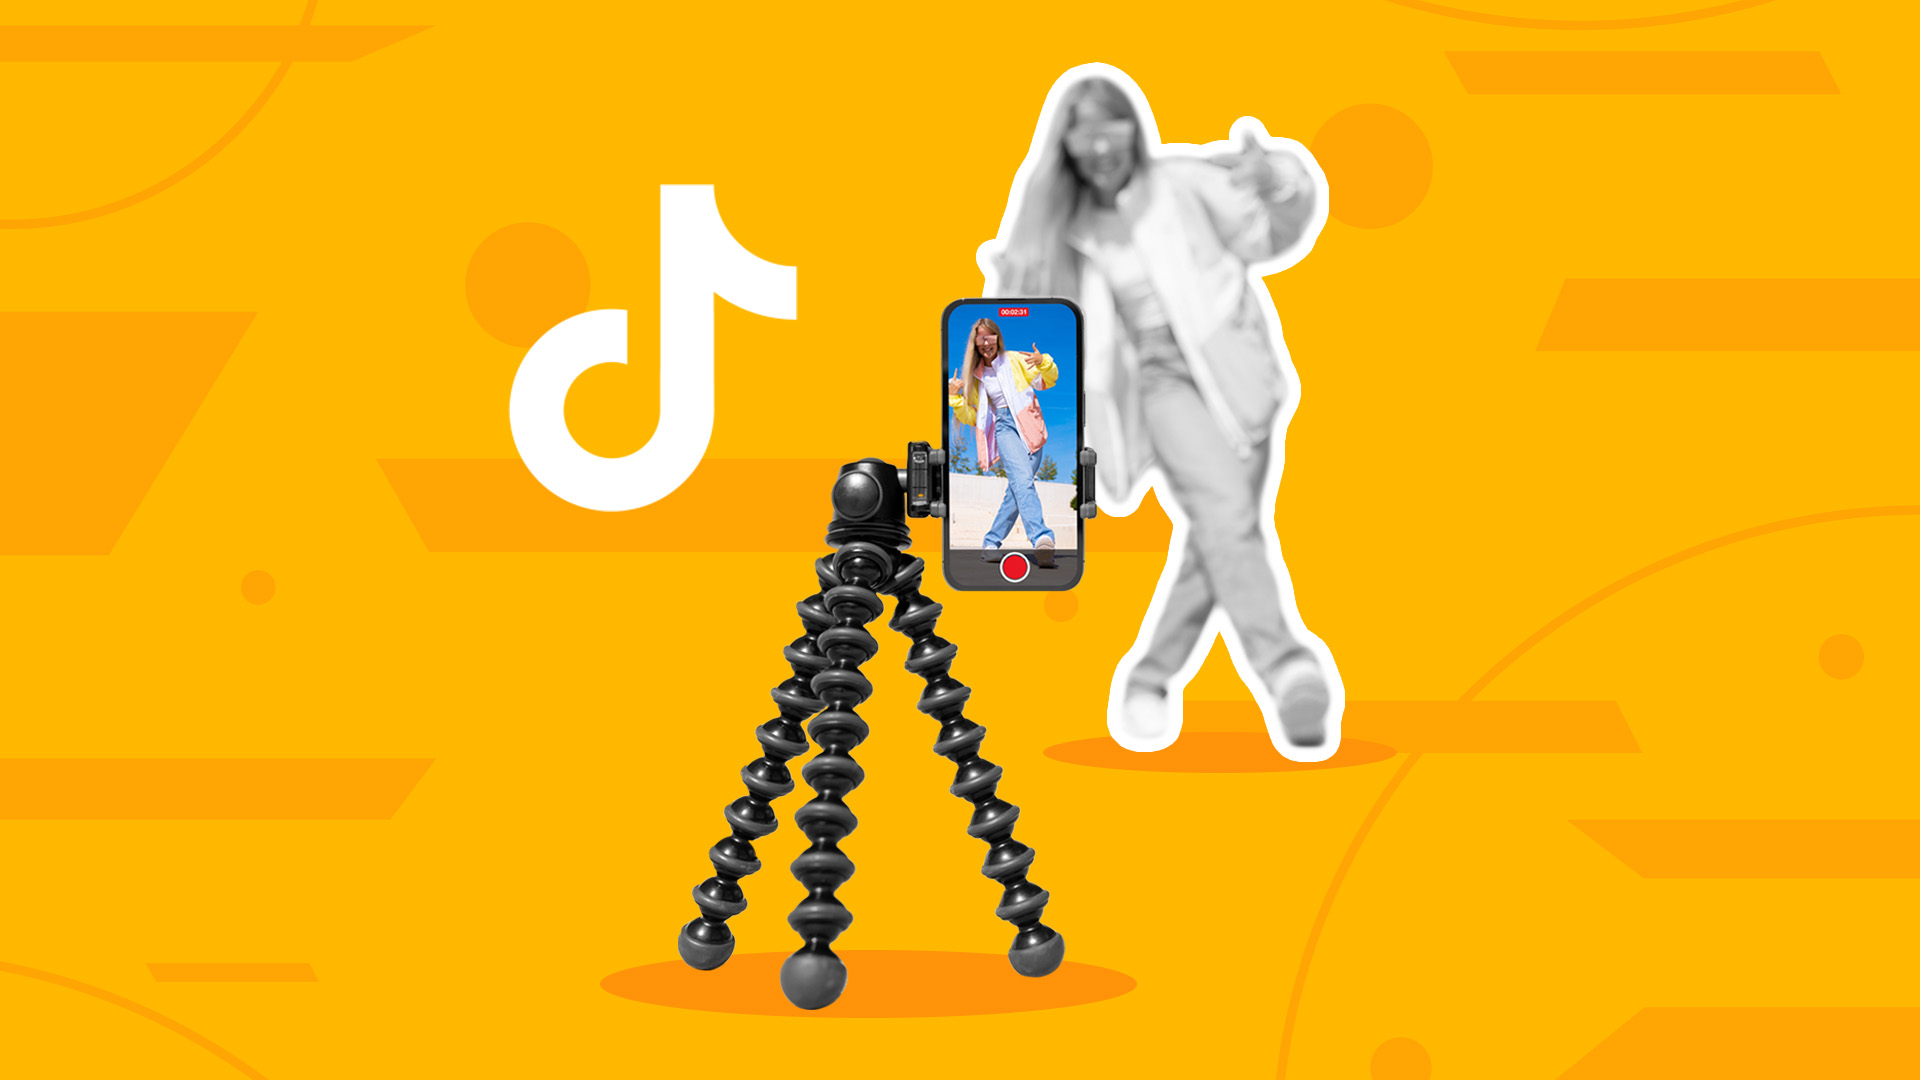 This image features a person recording a TikTok with their phone on a tripod. The image represents how to go live on TikTok.